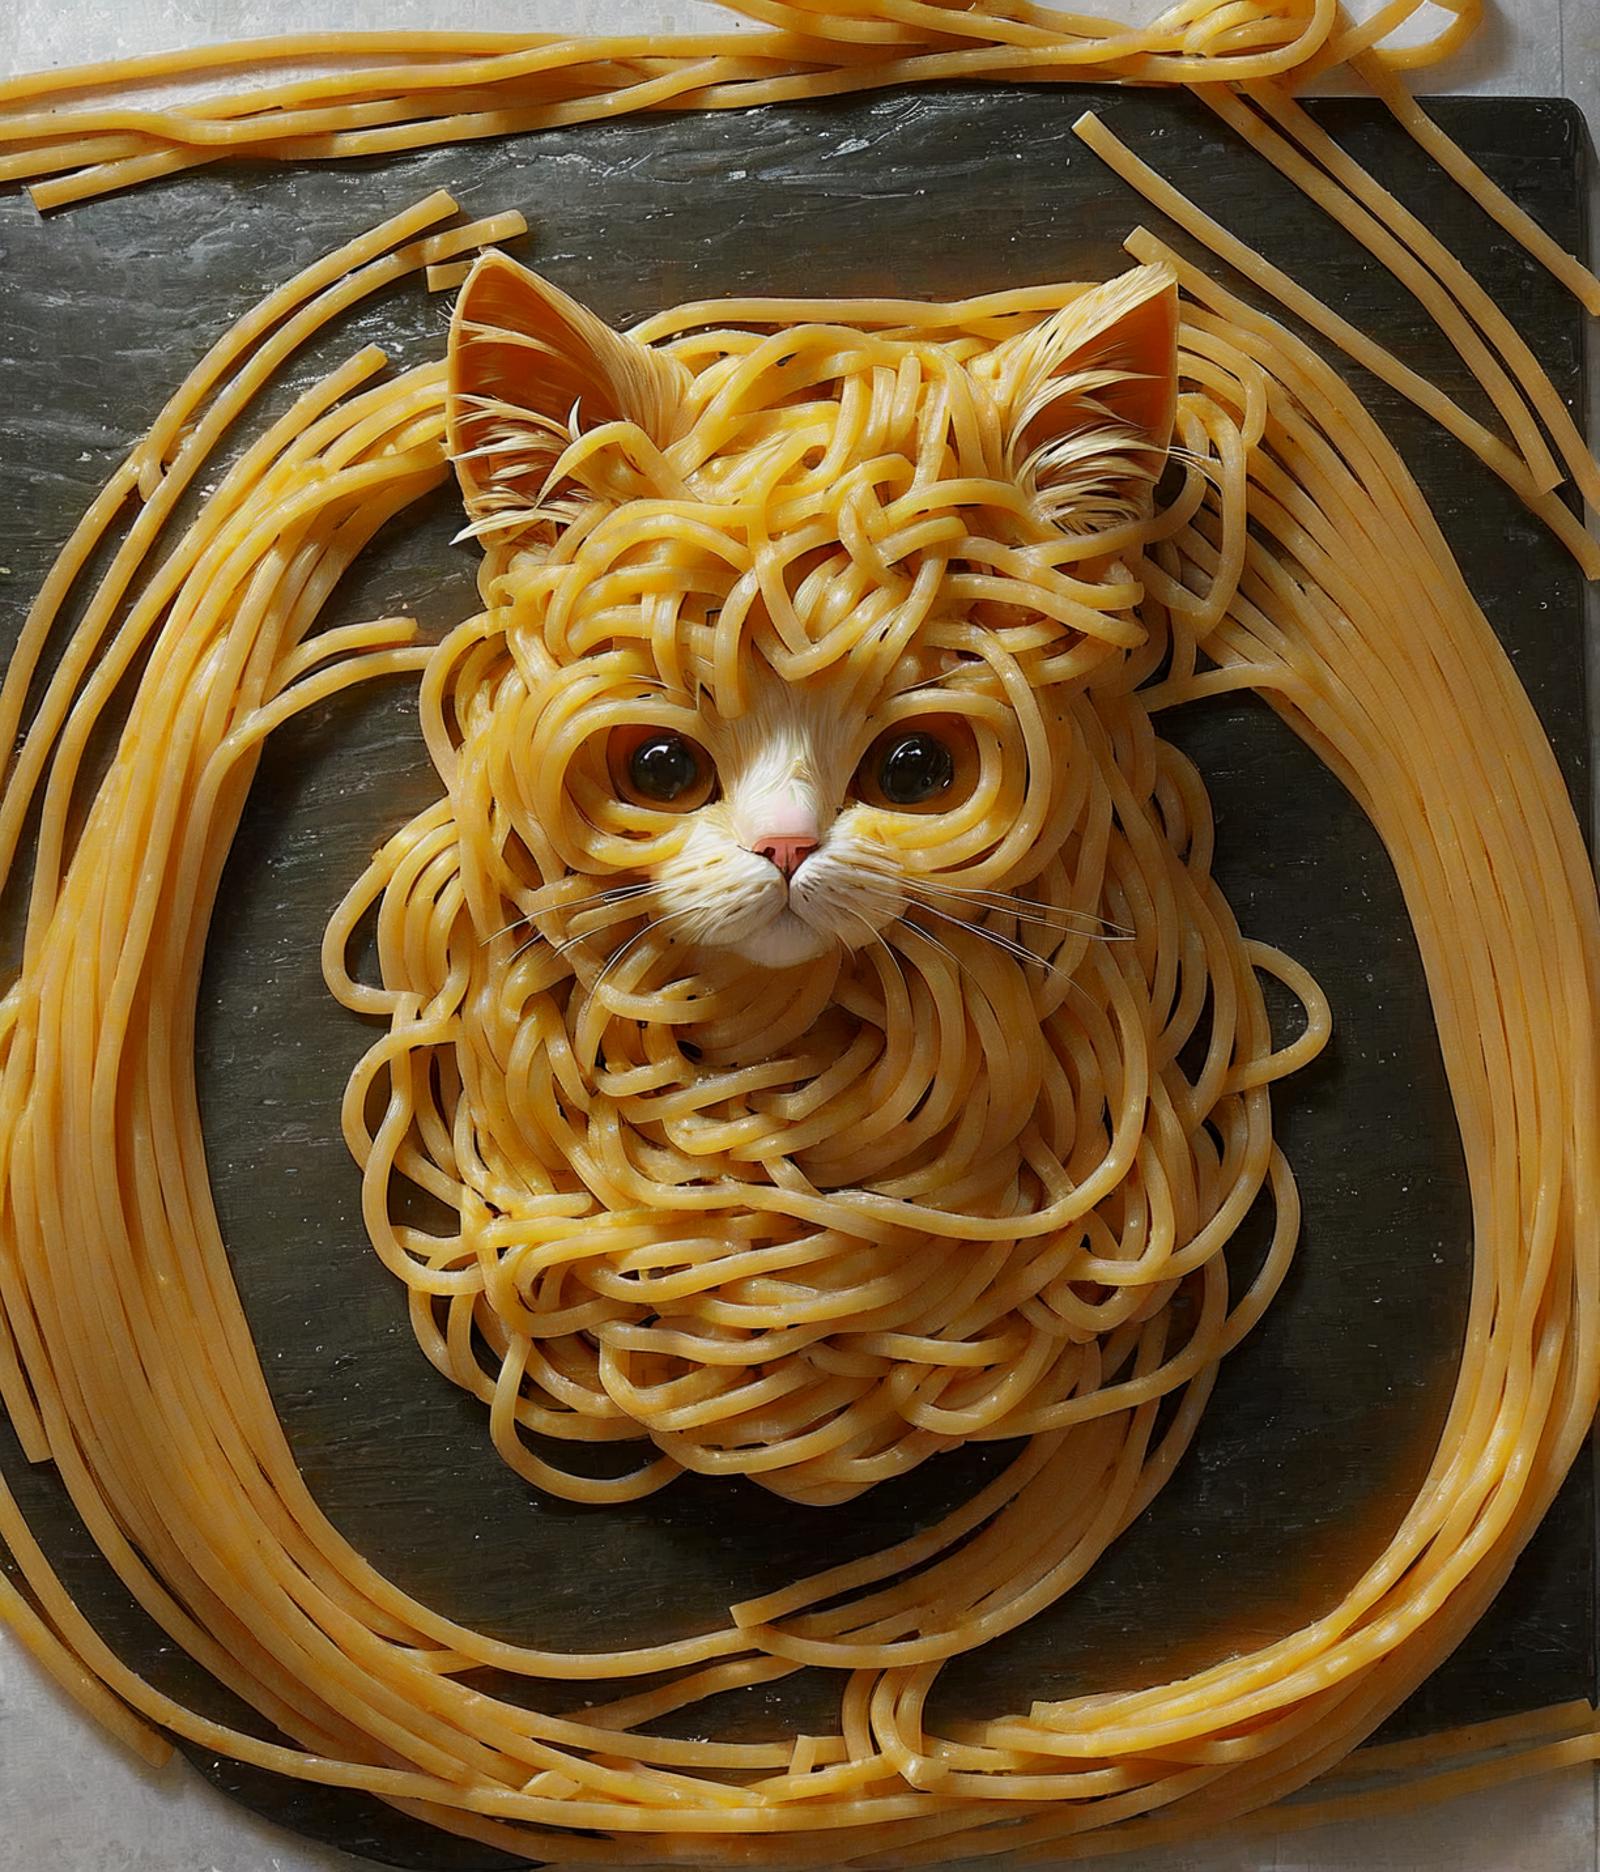 A creative and playful presentation of noodles and a cat.